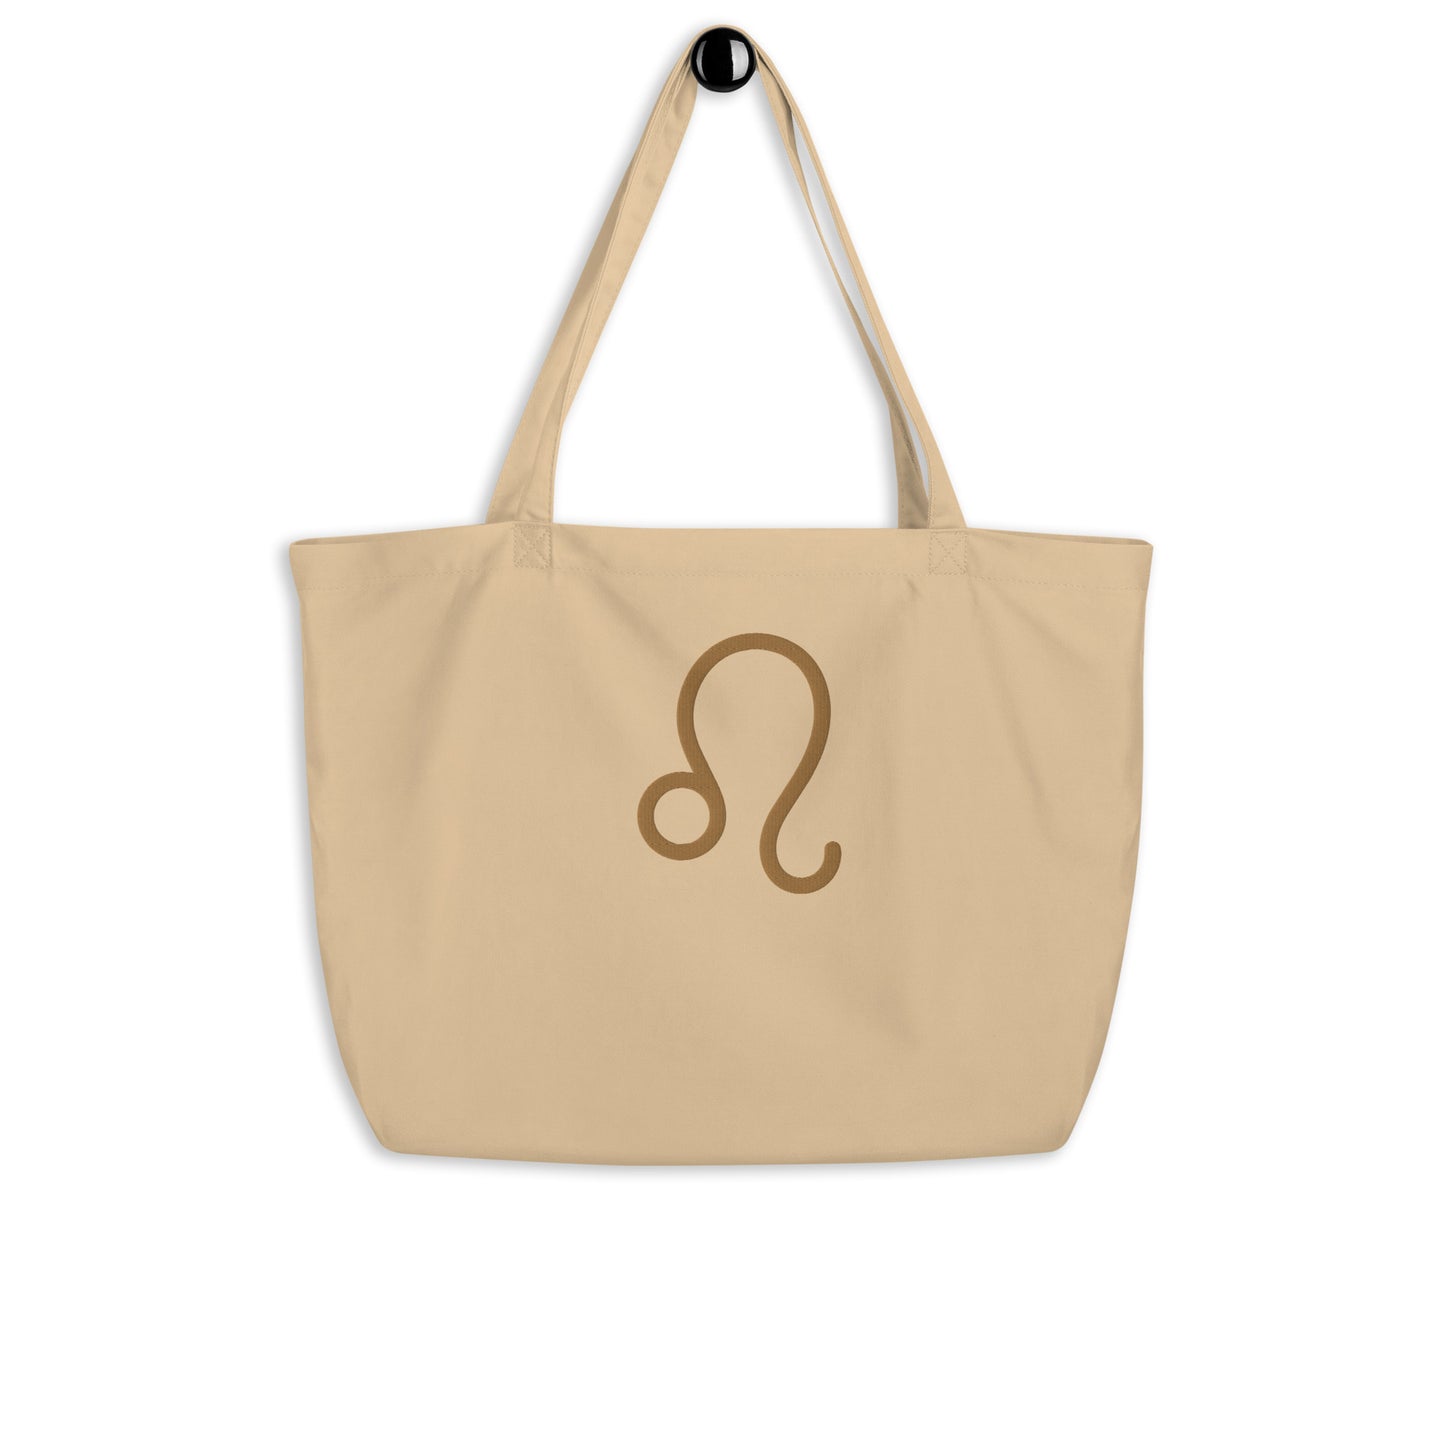 Leo - Large Open Tote Bag - Gold Thread